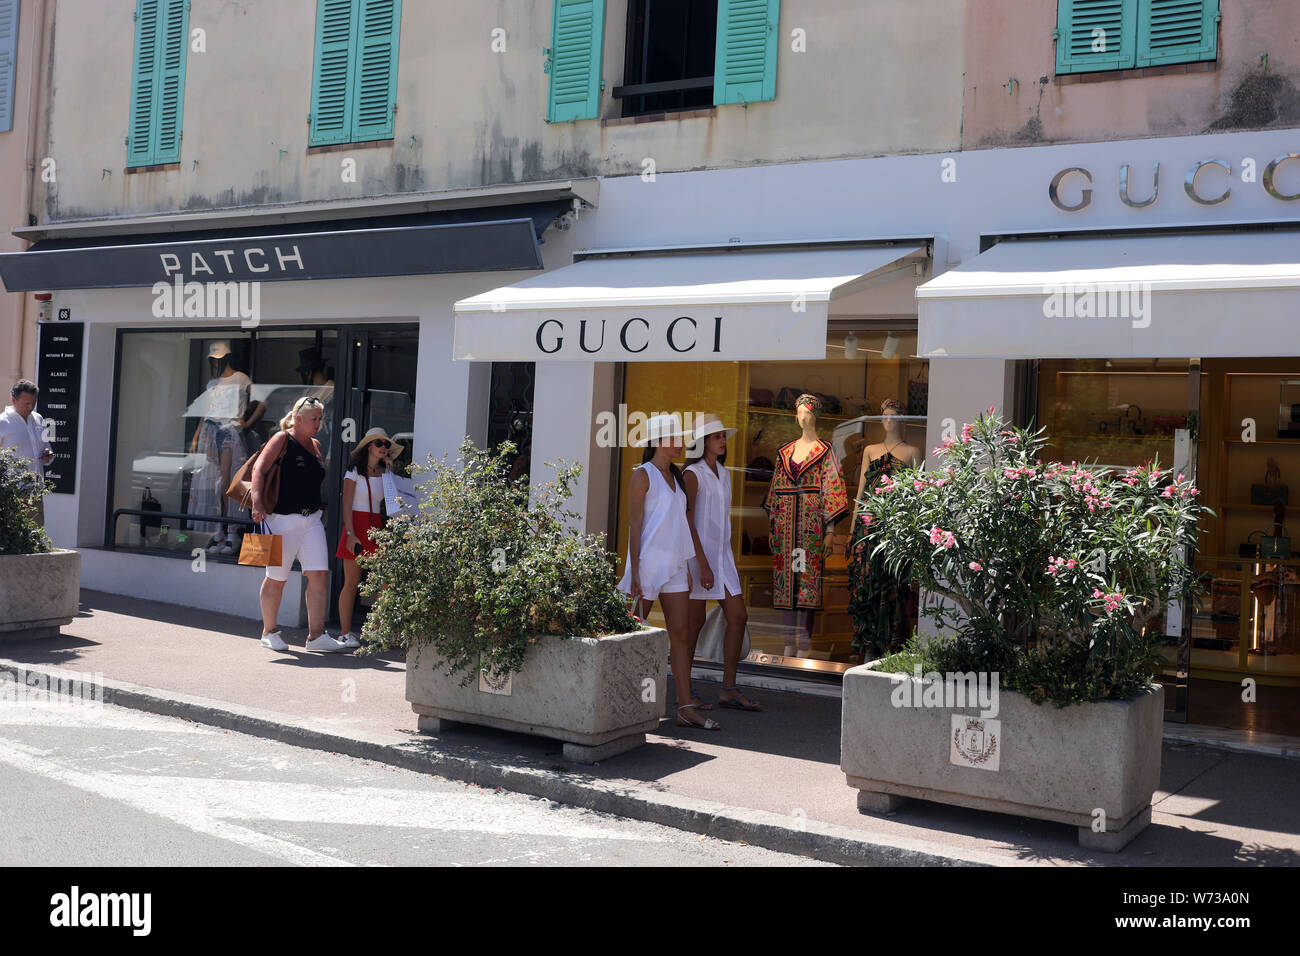 Page 2 - Gucci Outlet High Resolution Stock Photography and Images - Alamy